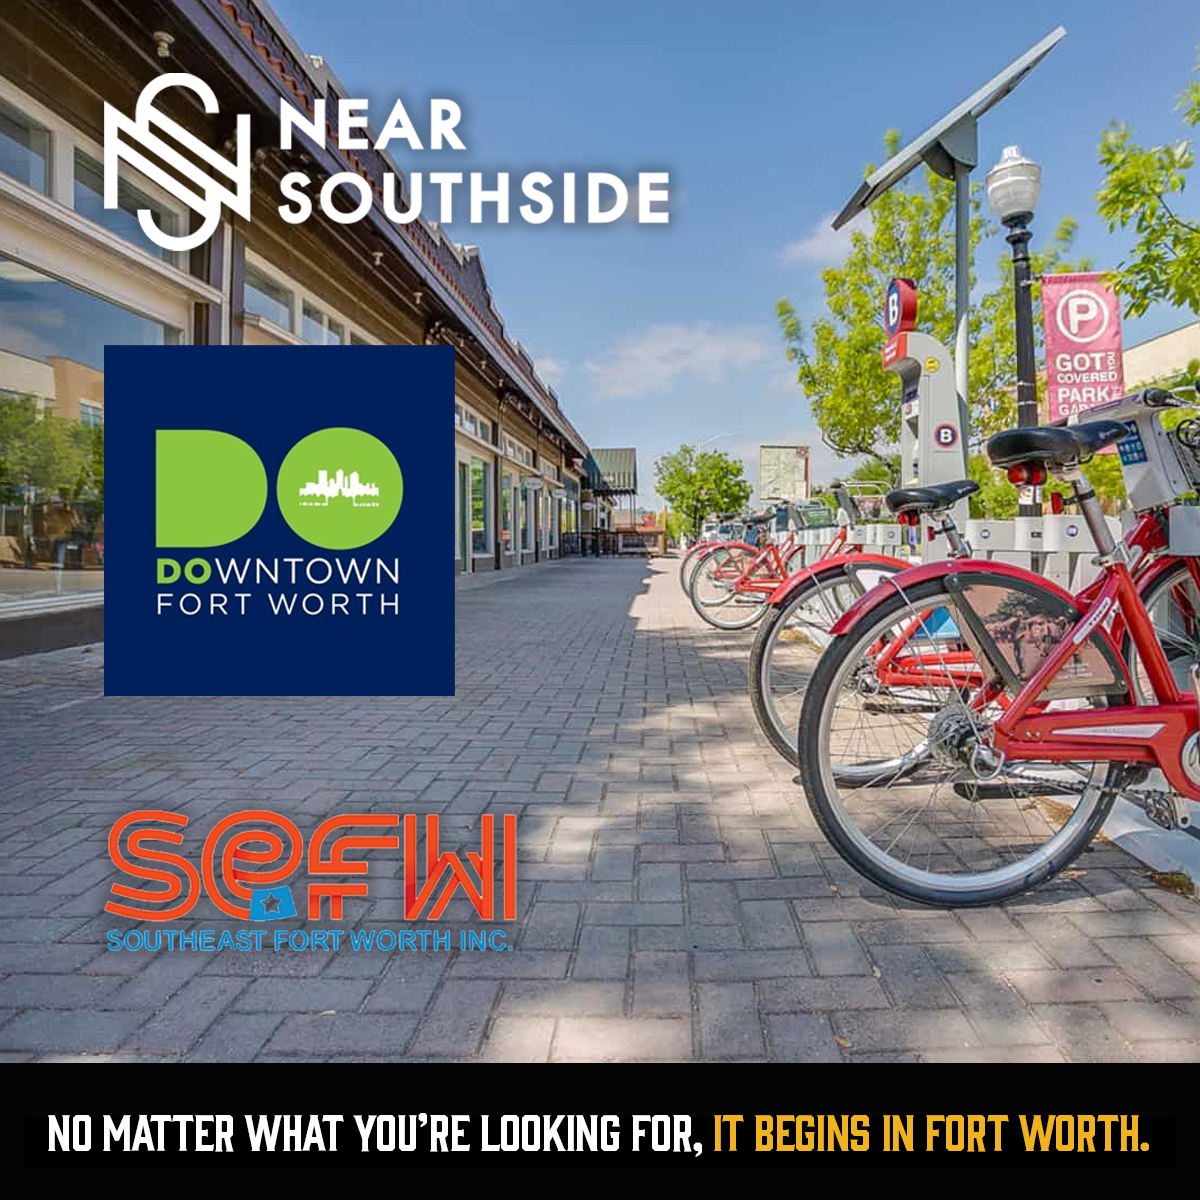 We'd be remiss if we didn't give an #EconDevWeek shout-out to a few of the local nonprofit organizations who are driving economic development in their own neighborhoods throughout #FortWorth – kudos to @NearSouthside, @DTFortWorth, and Southeast Fort Worth Inc. for all your work!